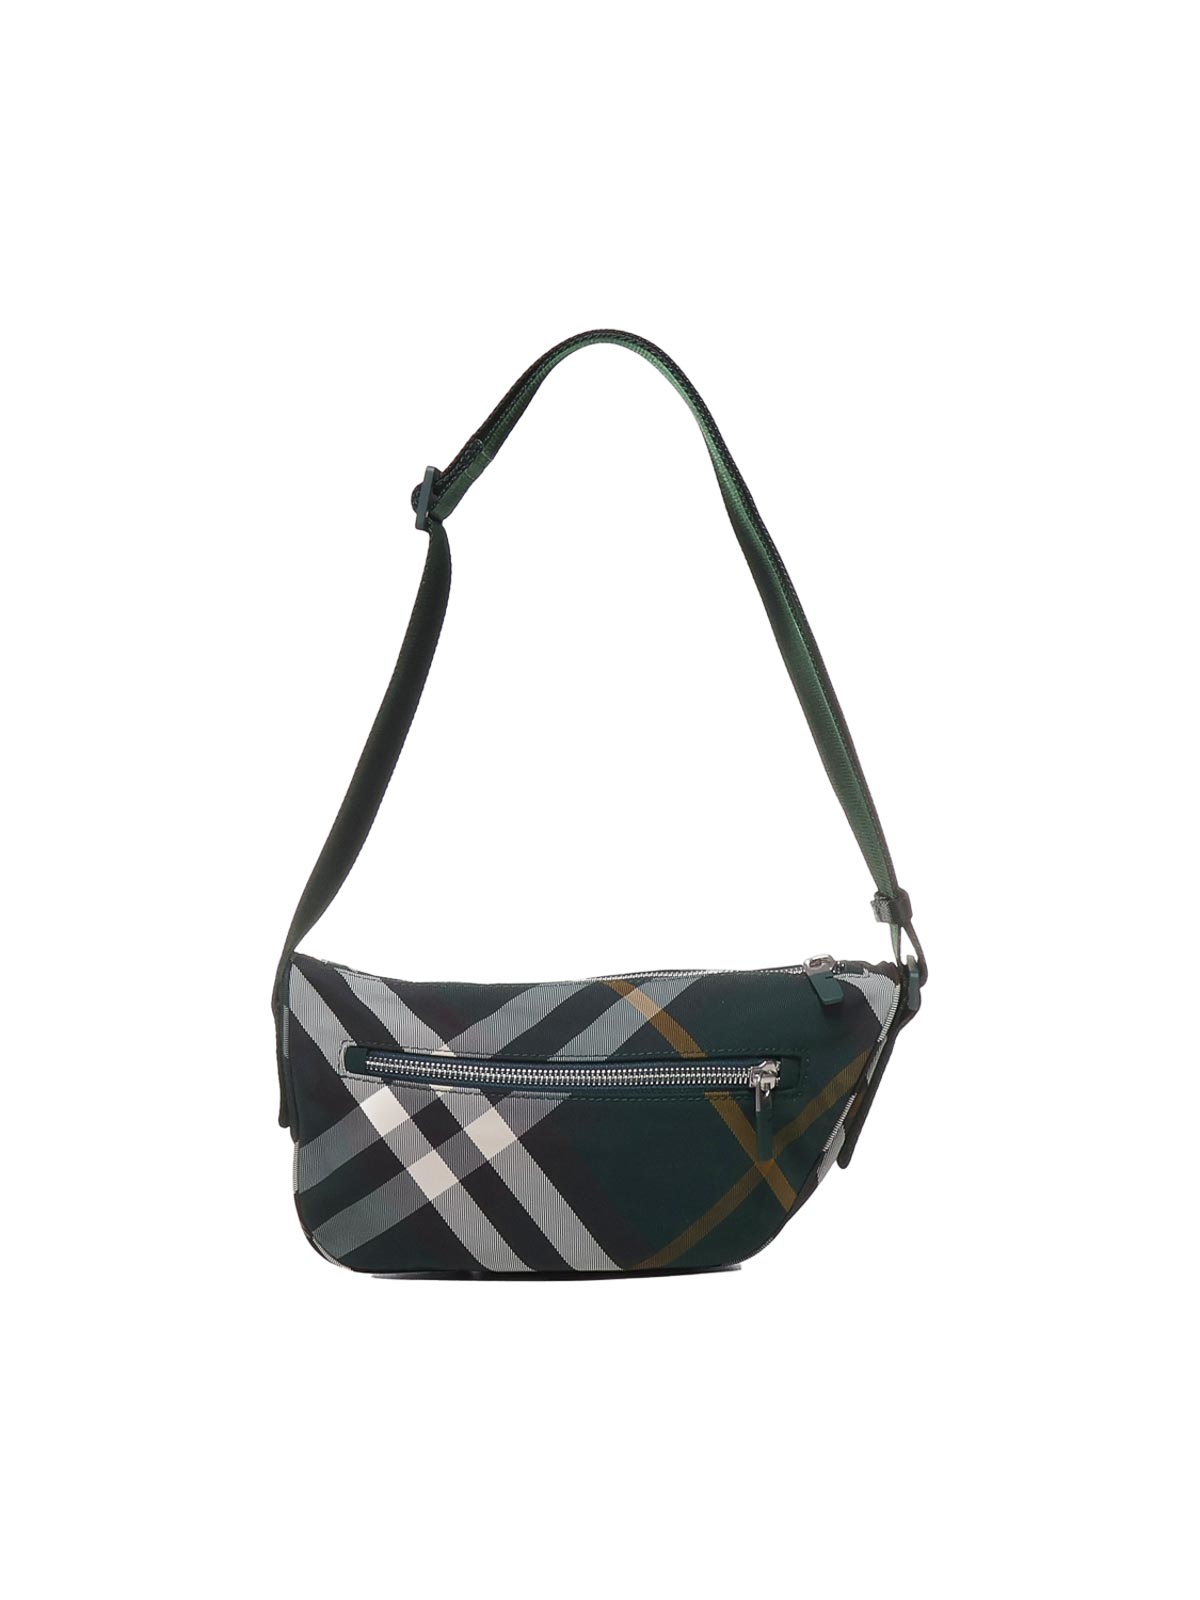 Shop Burberry Check Pouch Bag In Dark Green